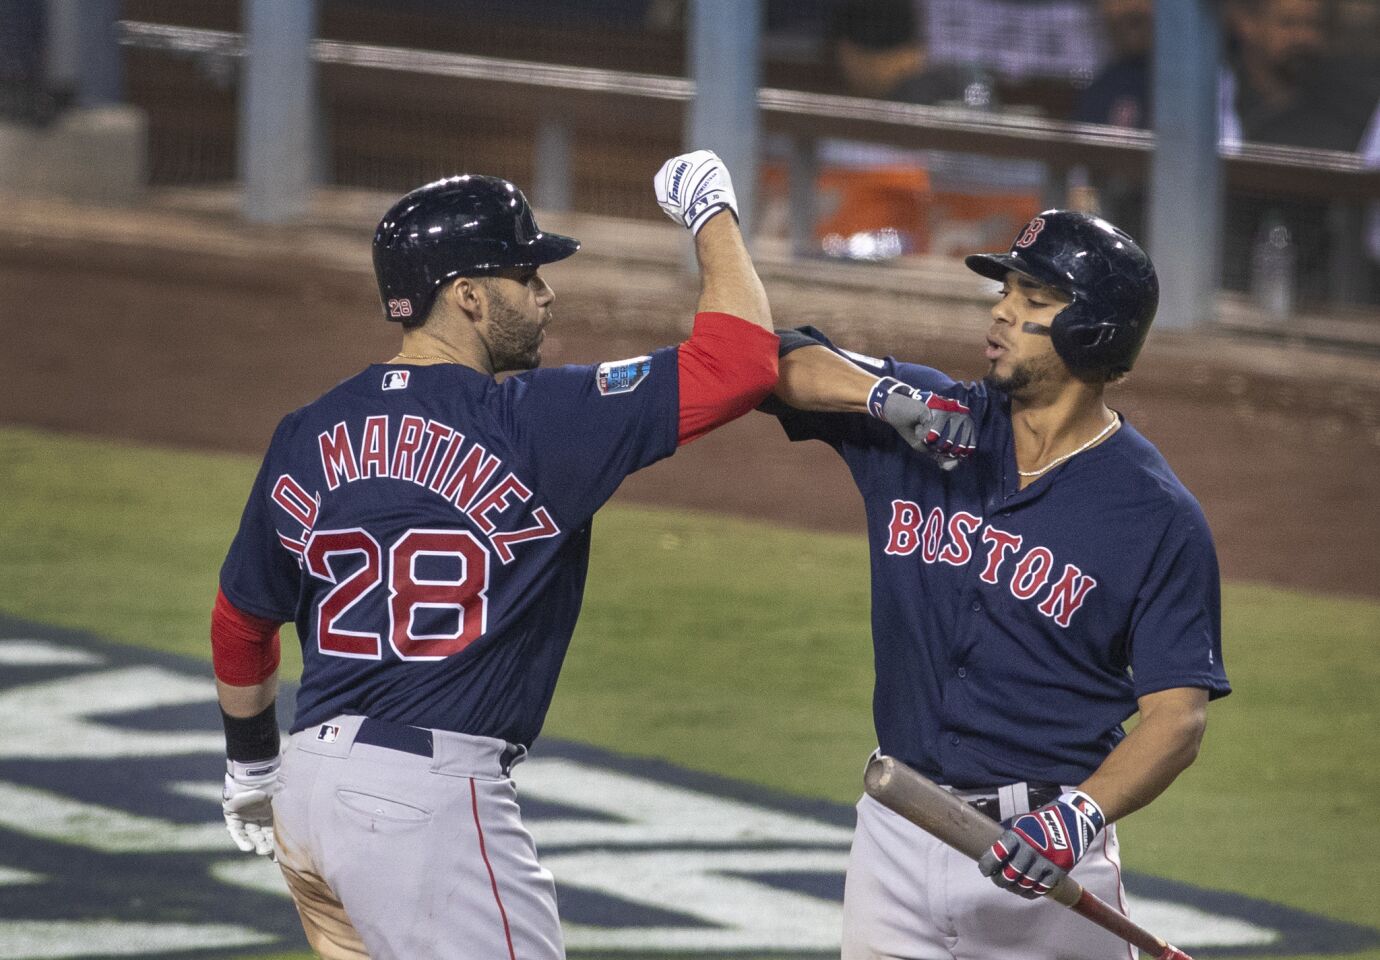 Red Sox right fielder J.D. Martinez, left, is congratulated by teammate Xander Bogaerts after hitting a home run in the seventh inning.